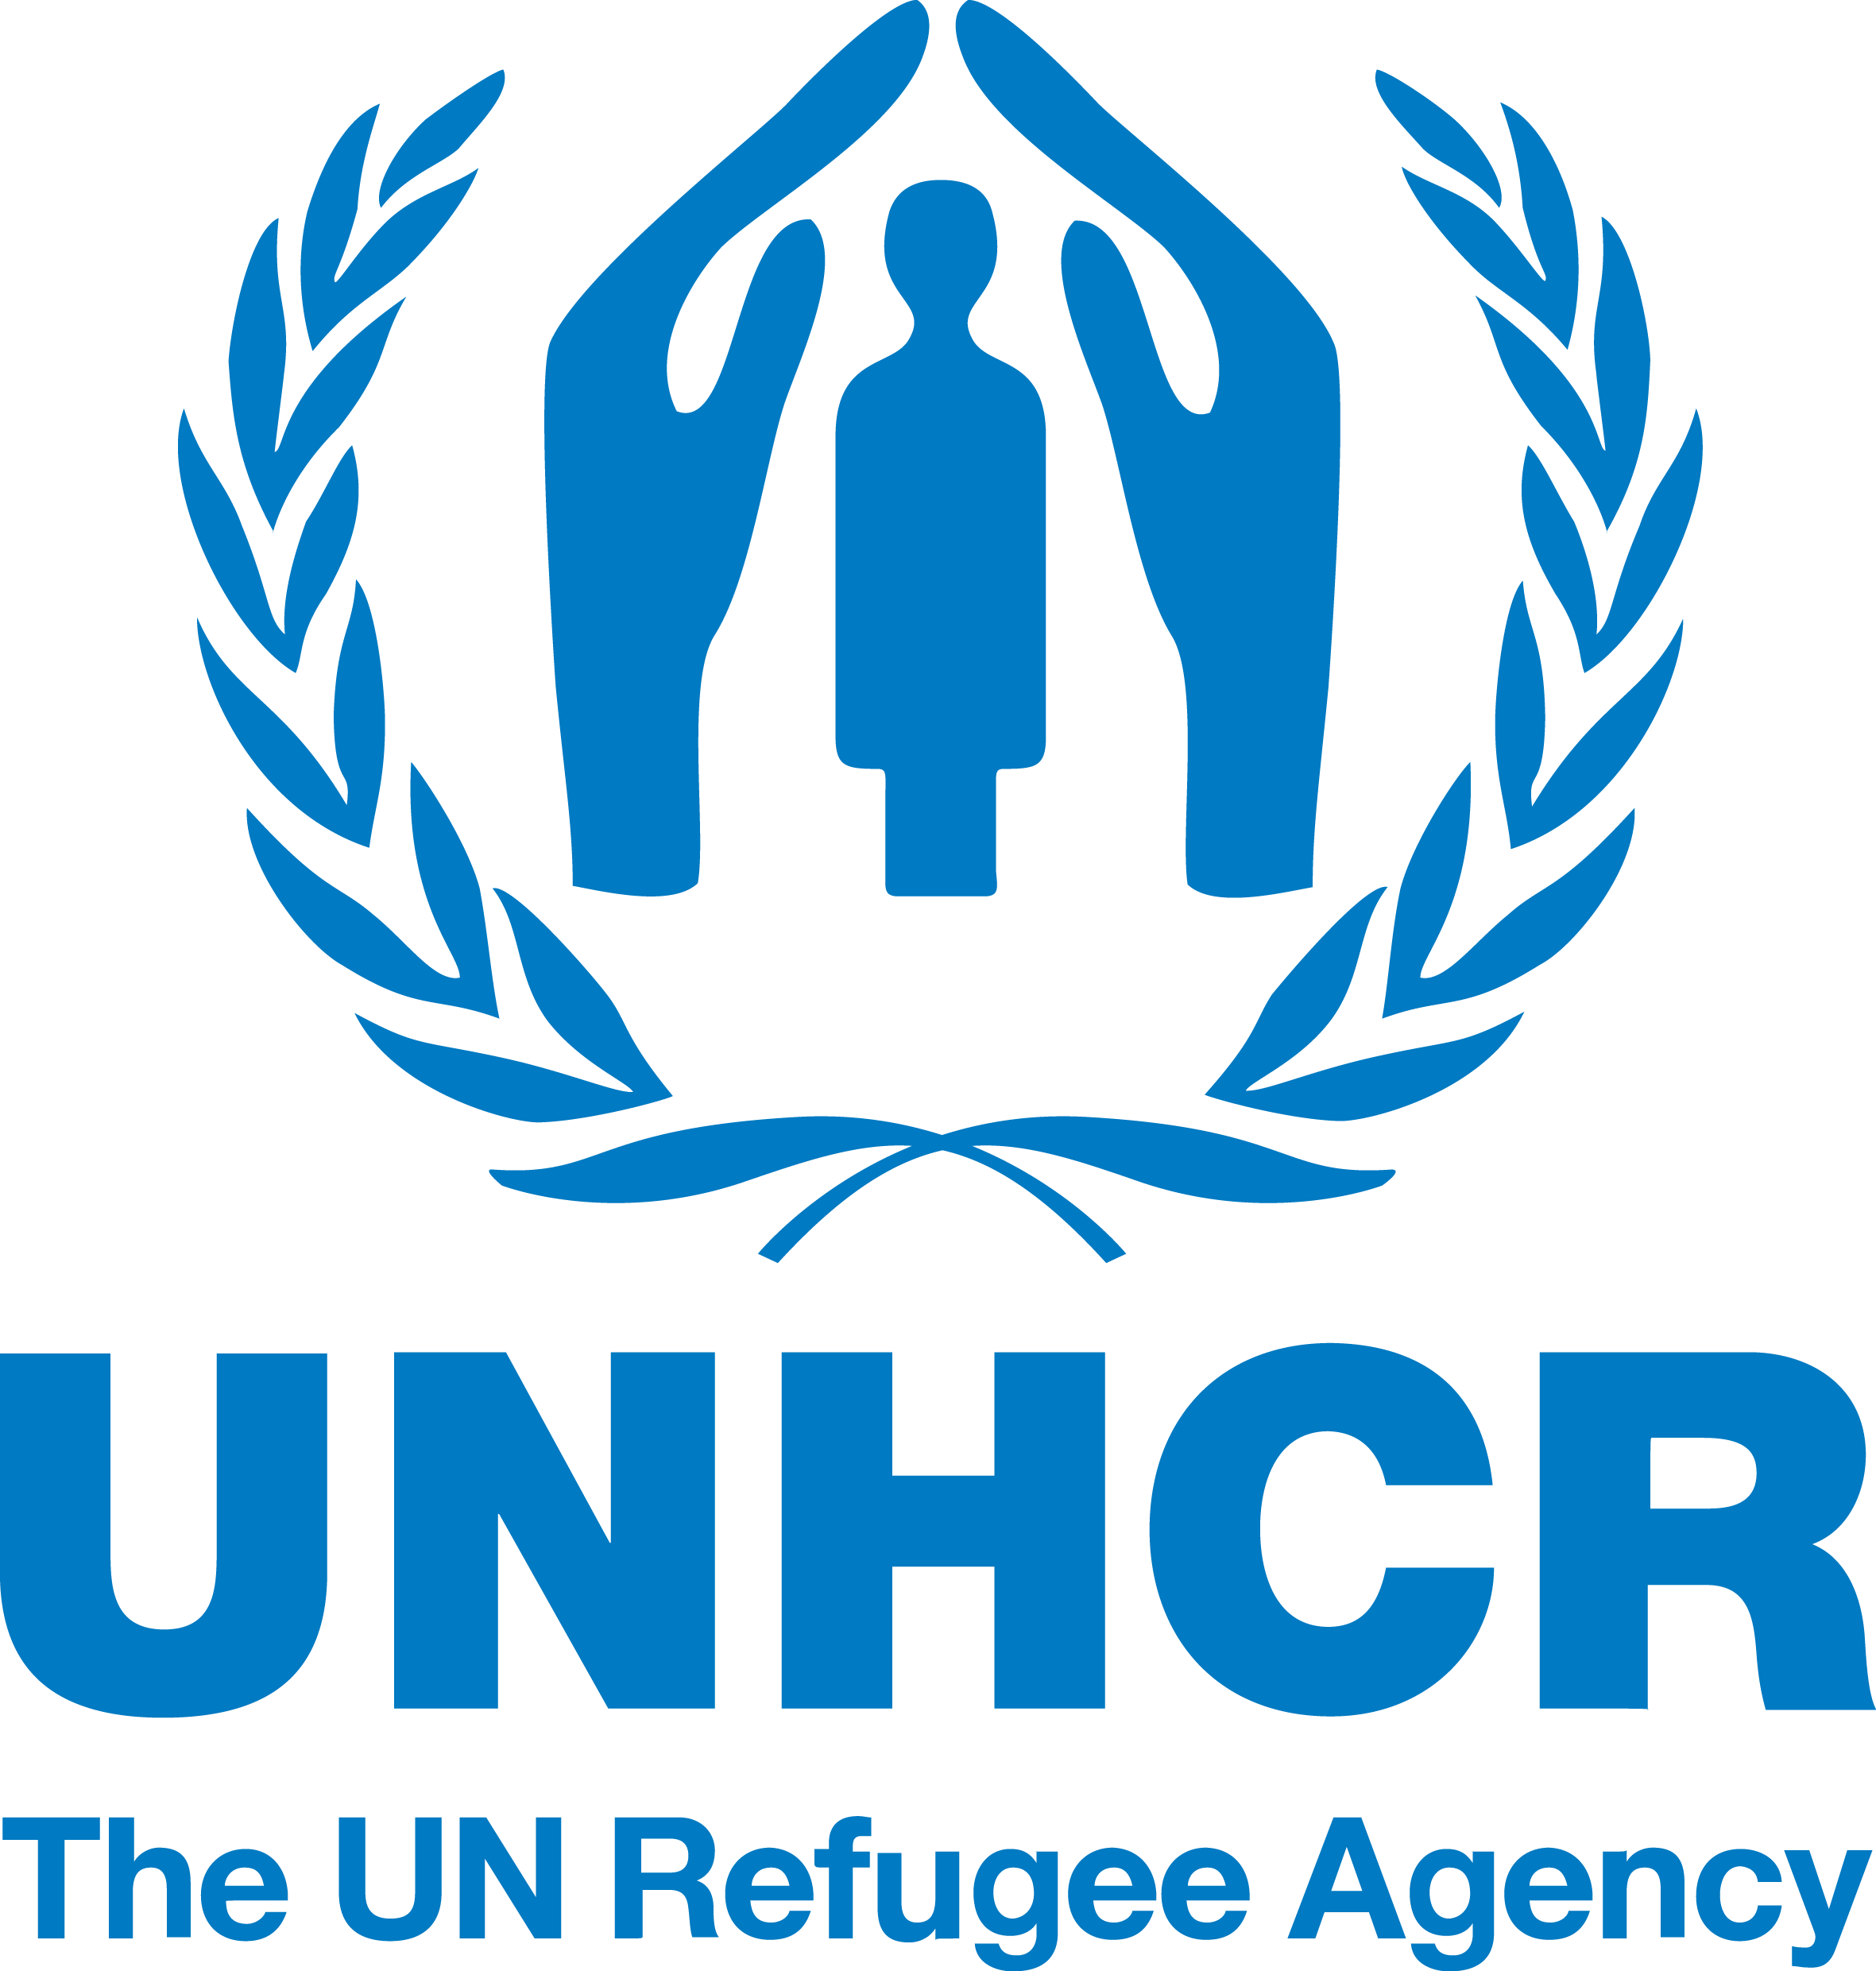 kisspng-united-nations-high-commissioner-for-refugees-worl-5b3e4c344c91c0.6122035215308093963136.png